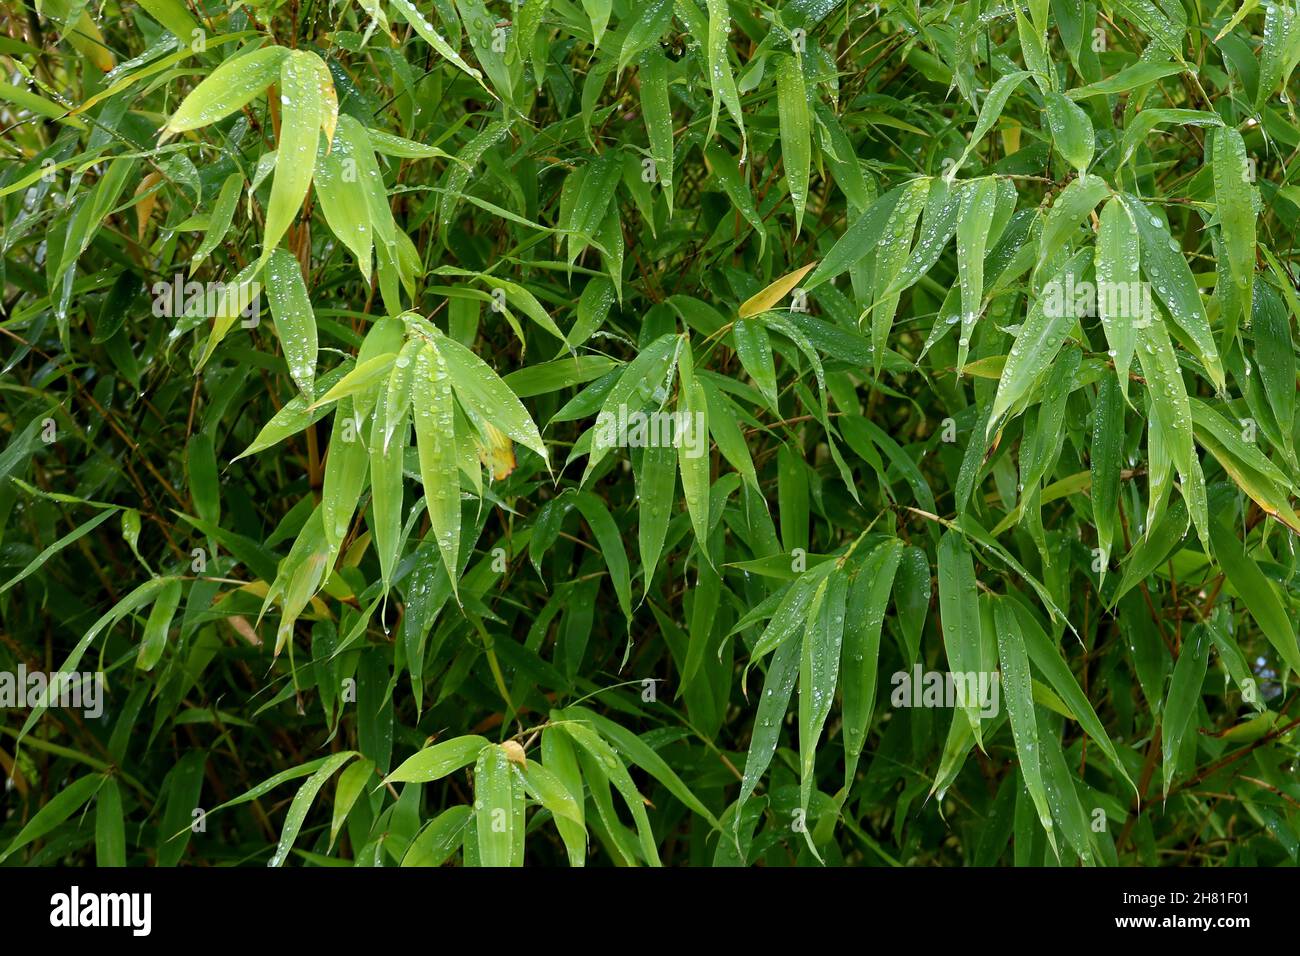 Raindrops on bamboo plant leaves closeup view Stock Photo